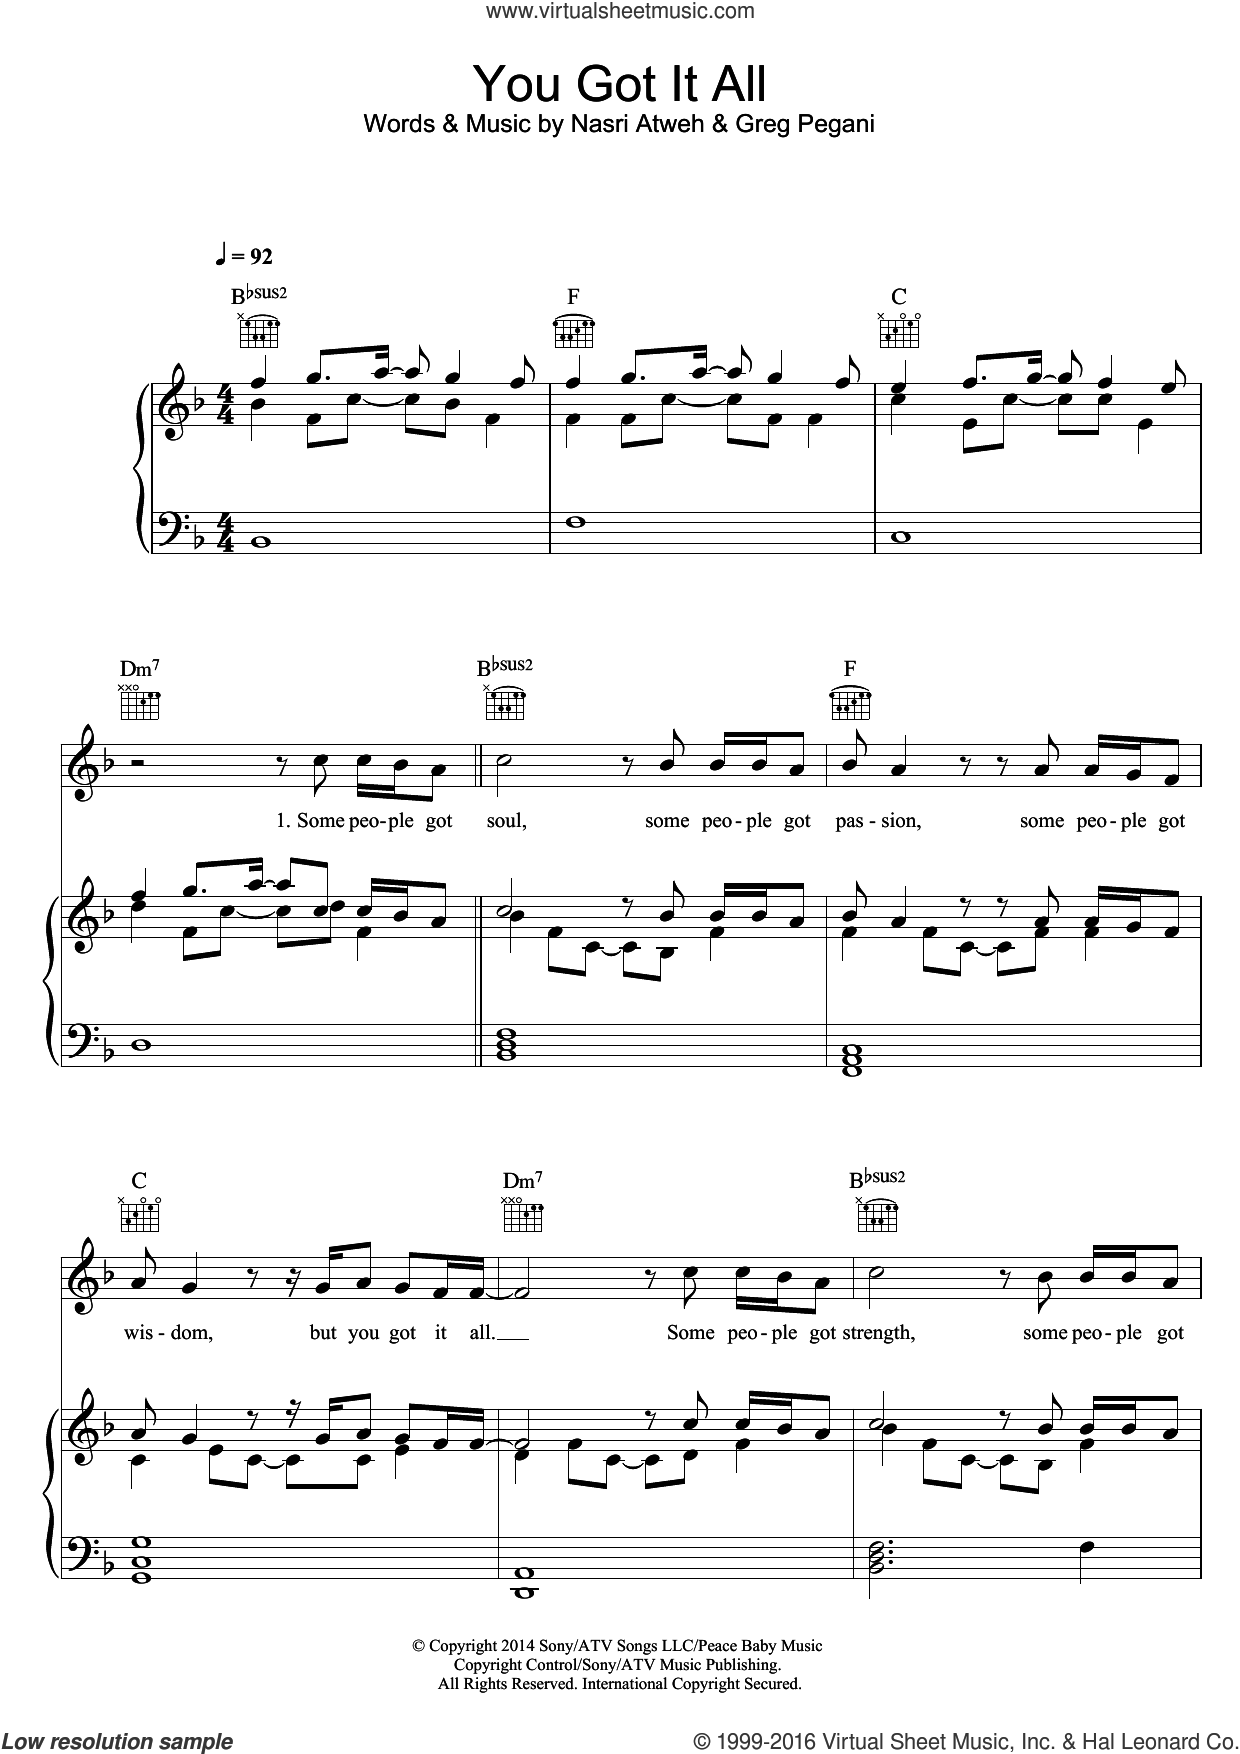 You Got It All sheet music for voice, piano or guitar v2